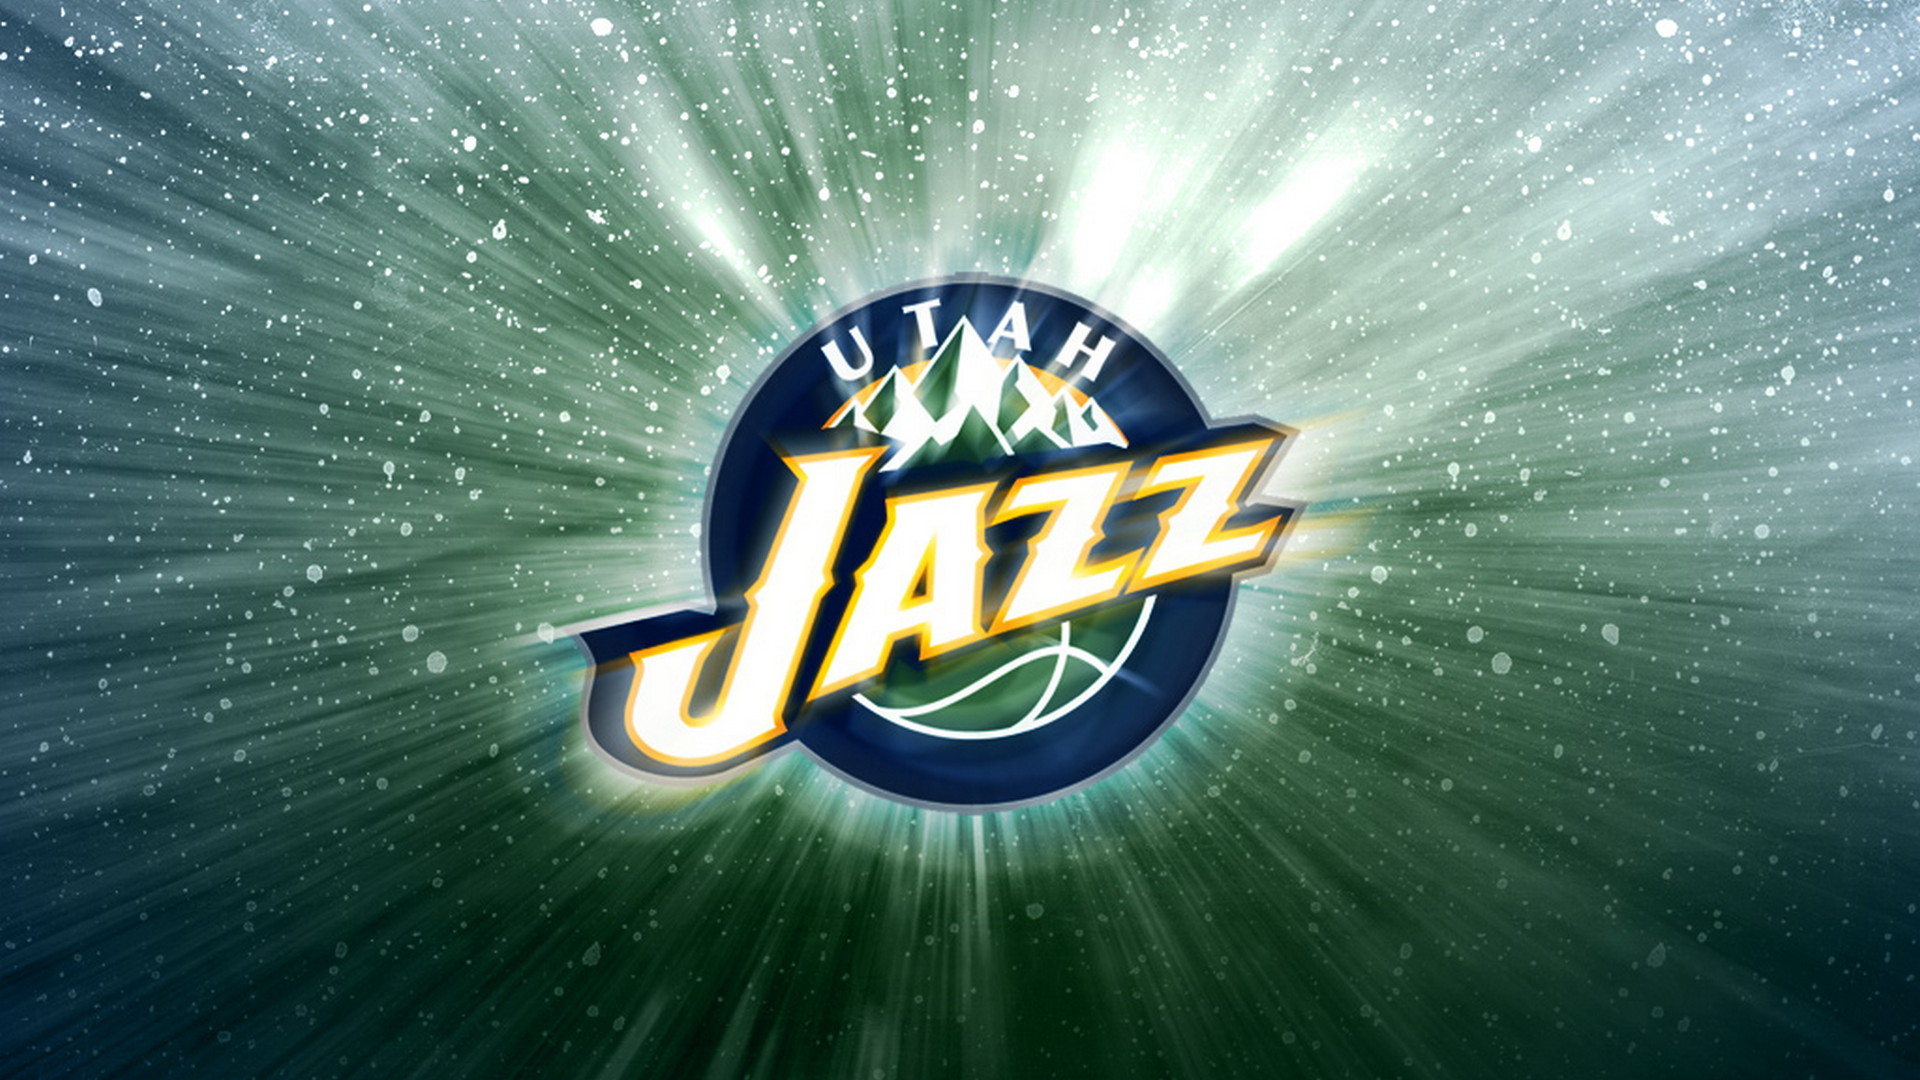 Utah Jazz Wallpaper with high-resolution 1920x1080 pixel. You can use this wallpaper for your Desktop Computer Backgrounds, Windows or Mac Screensavers, iPhone Lock screen, Tablet or Android and another Mobile Phone device